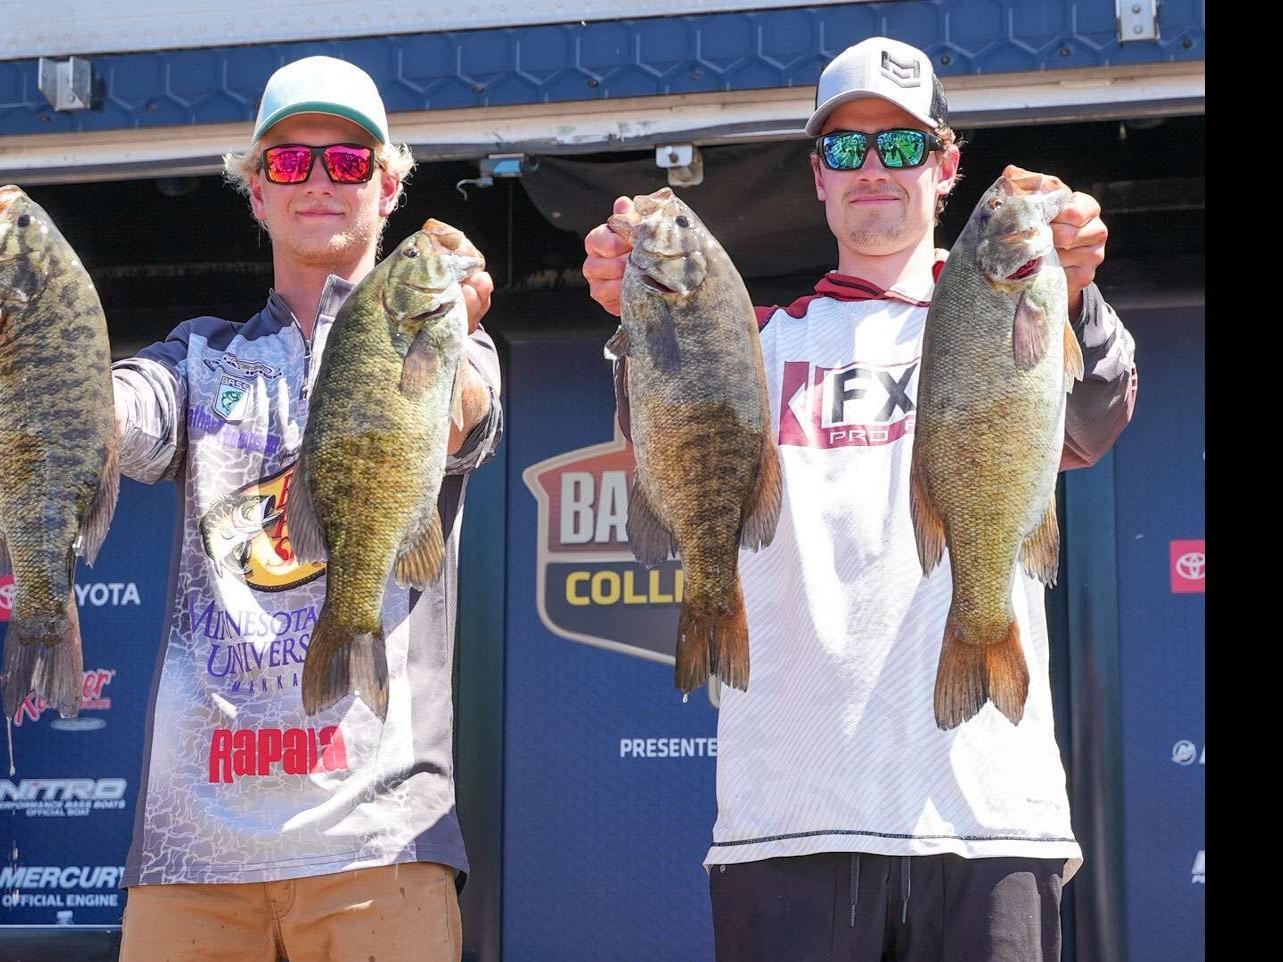 MSU bass fishing team hopes to grow sport after national competition, Local News